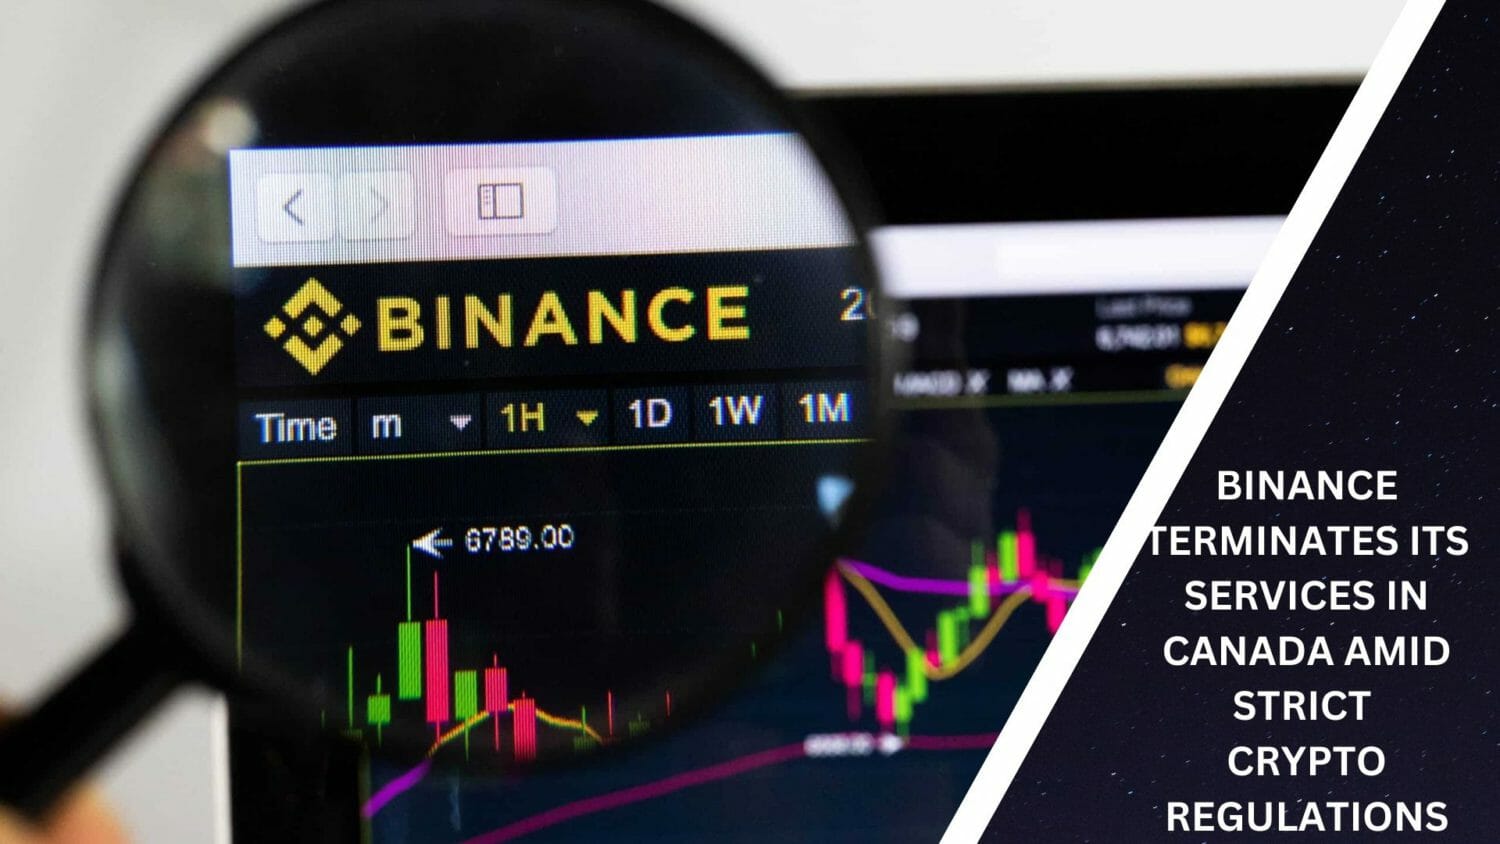 Binance Terminates Its Services In Canada Amid Strict Crypto Regulations